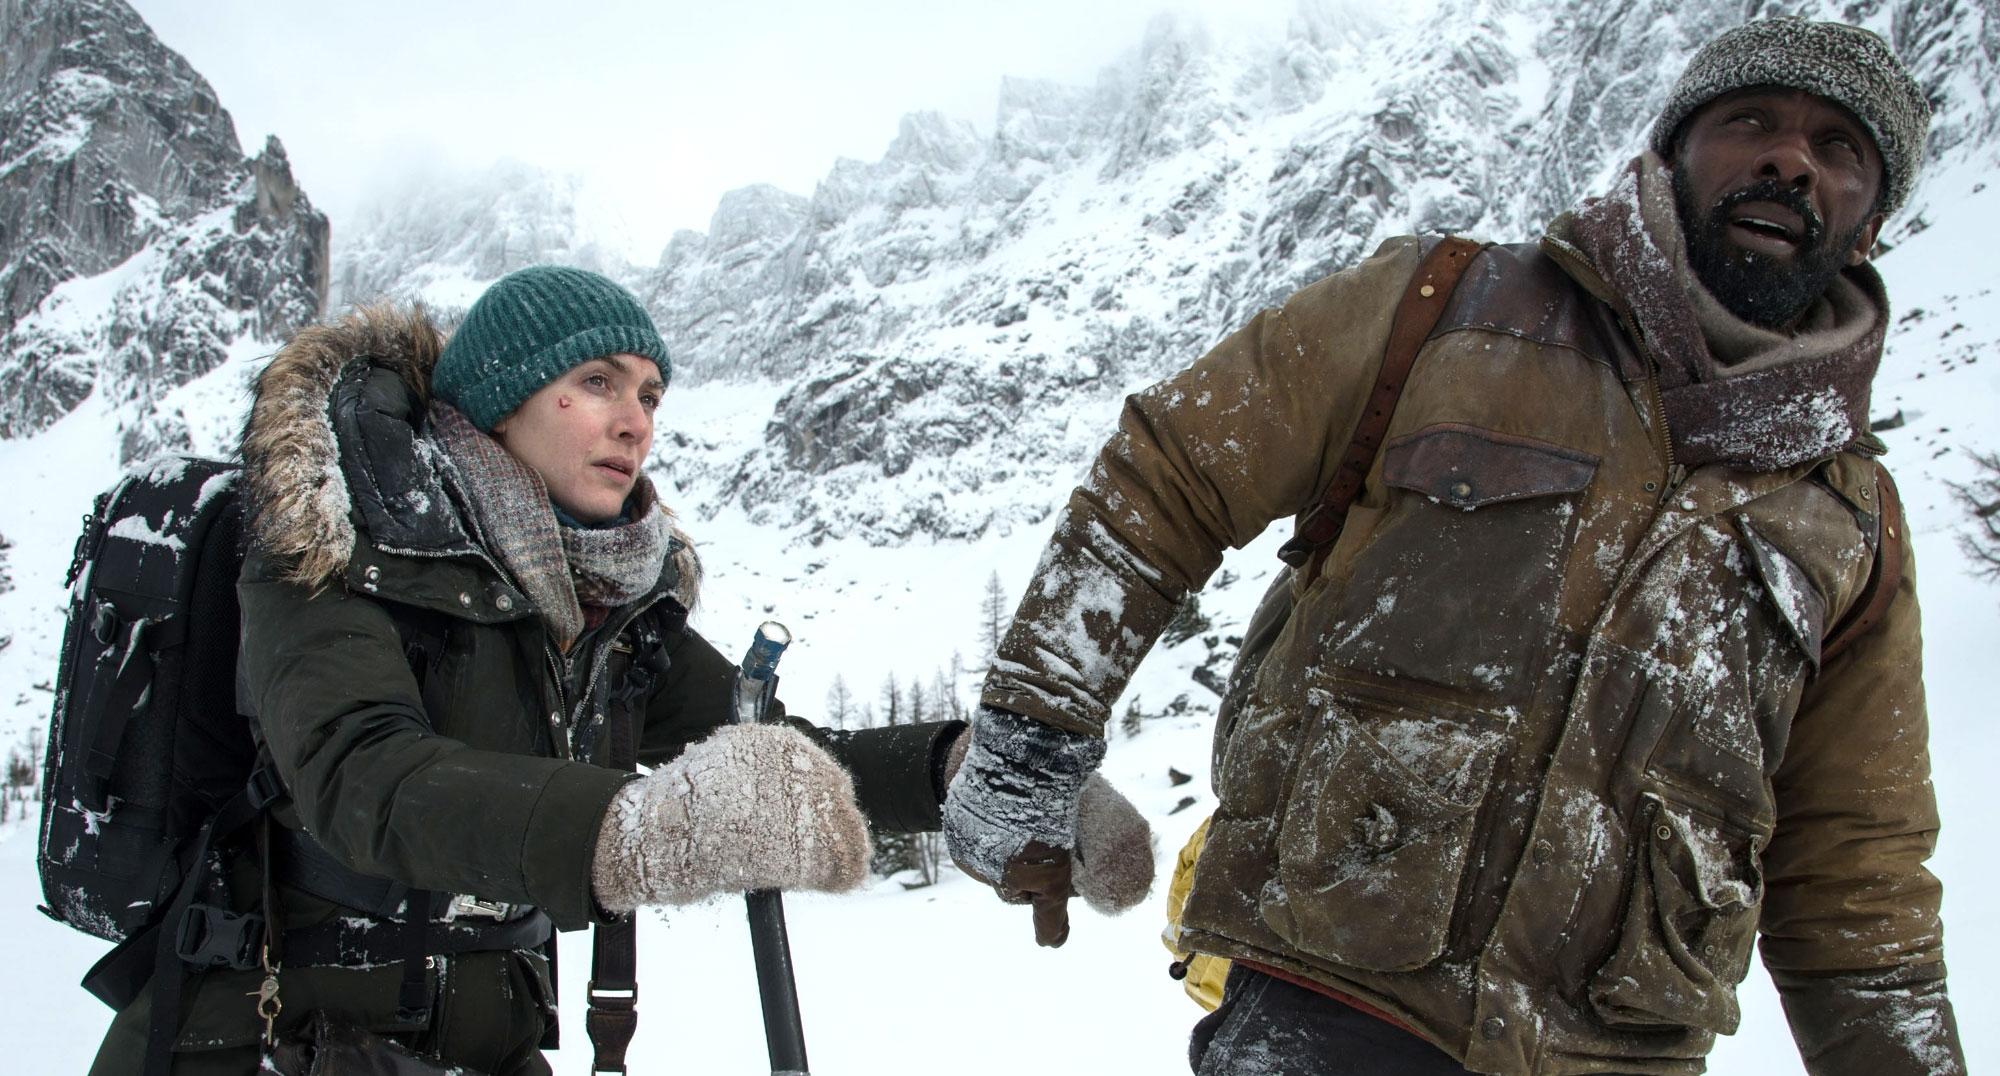 Grim peaks: in the film’s lesser moments, it’s as if Ben (Elba) and Alex (Winslet) are on an especially rugged, outward bound-style adventure holiday